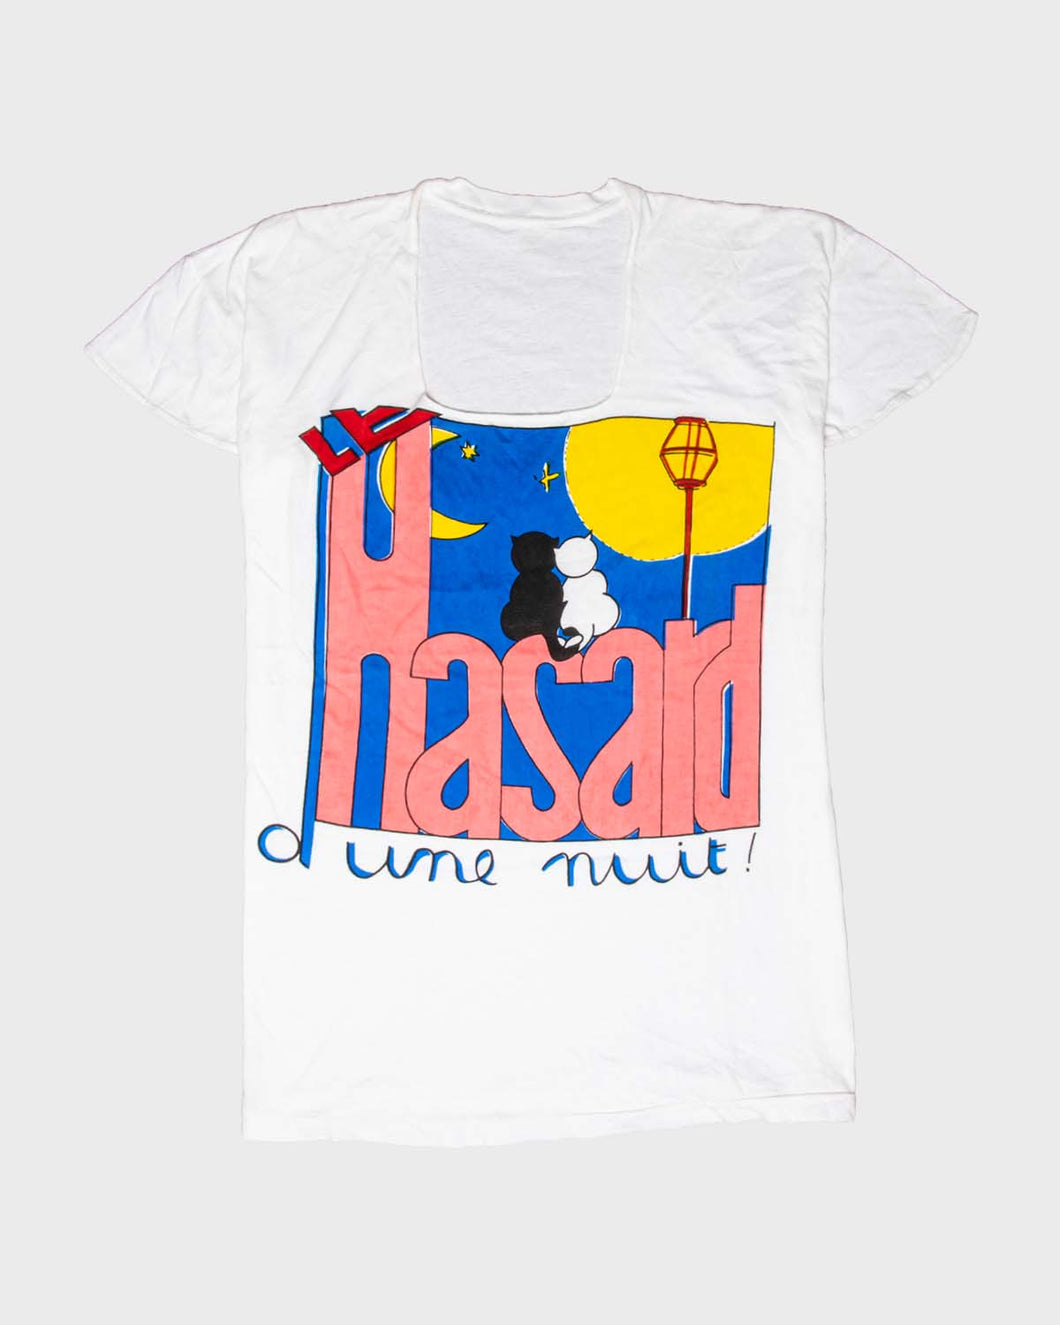 White 'le hassard' (by chance) cats design t-shirt